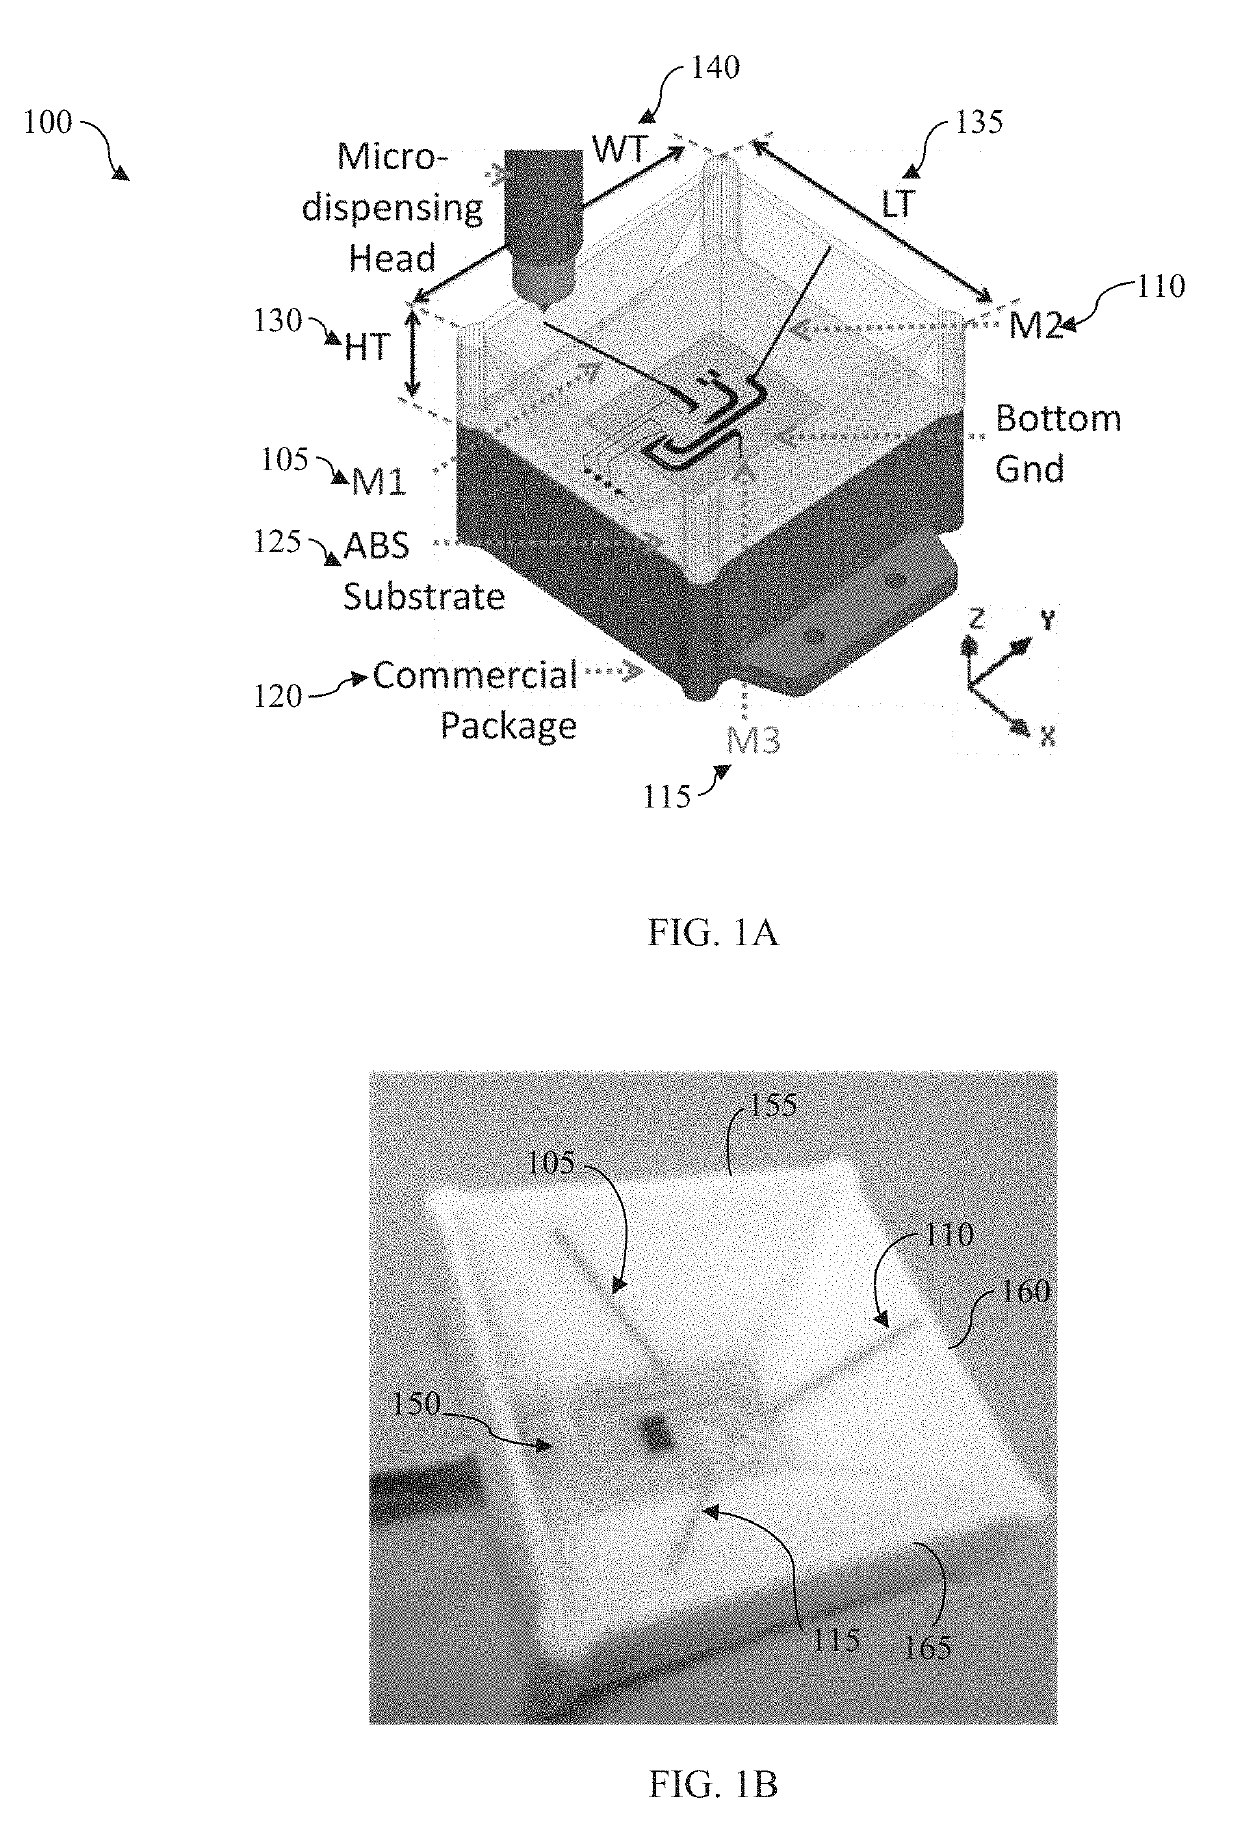 3D tripolar antenna and method of manufacture